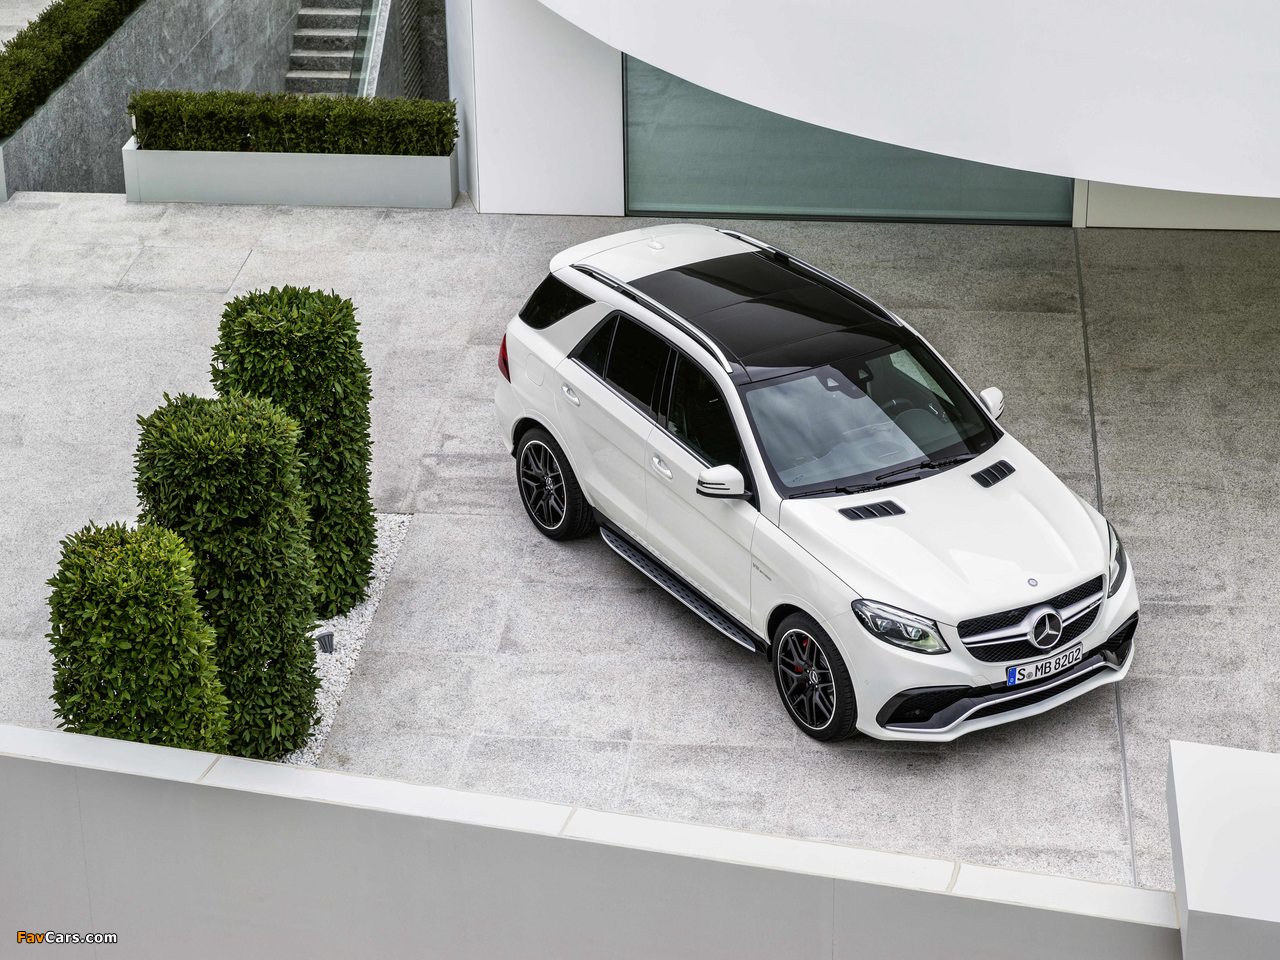 Mercedes-AMG GLE 63 S 4MATIC (W166) 2015 pictures (1280 x 960)